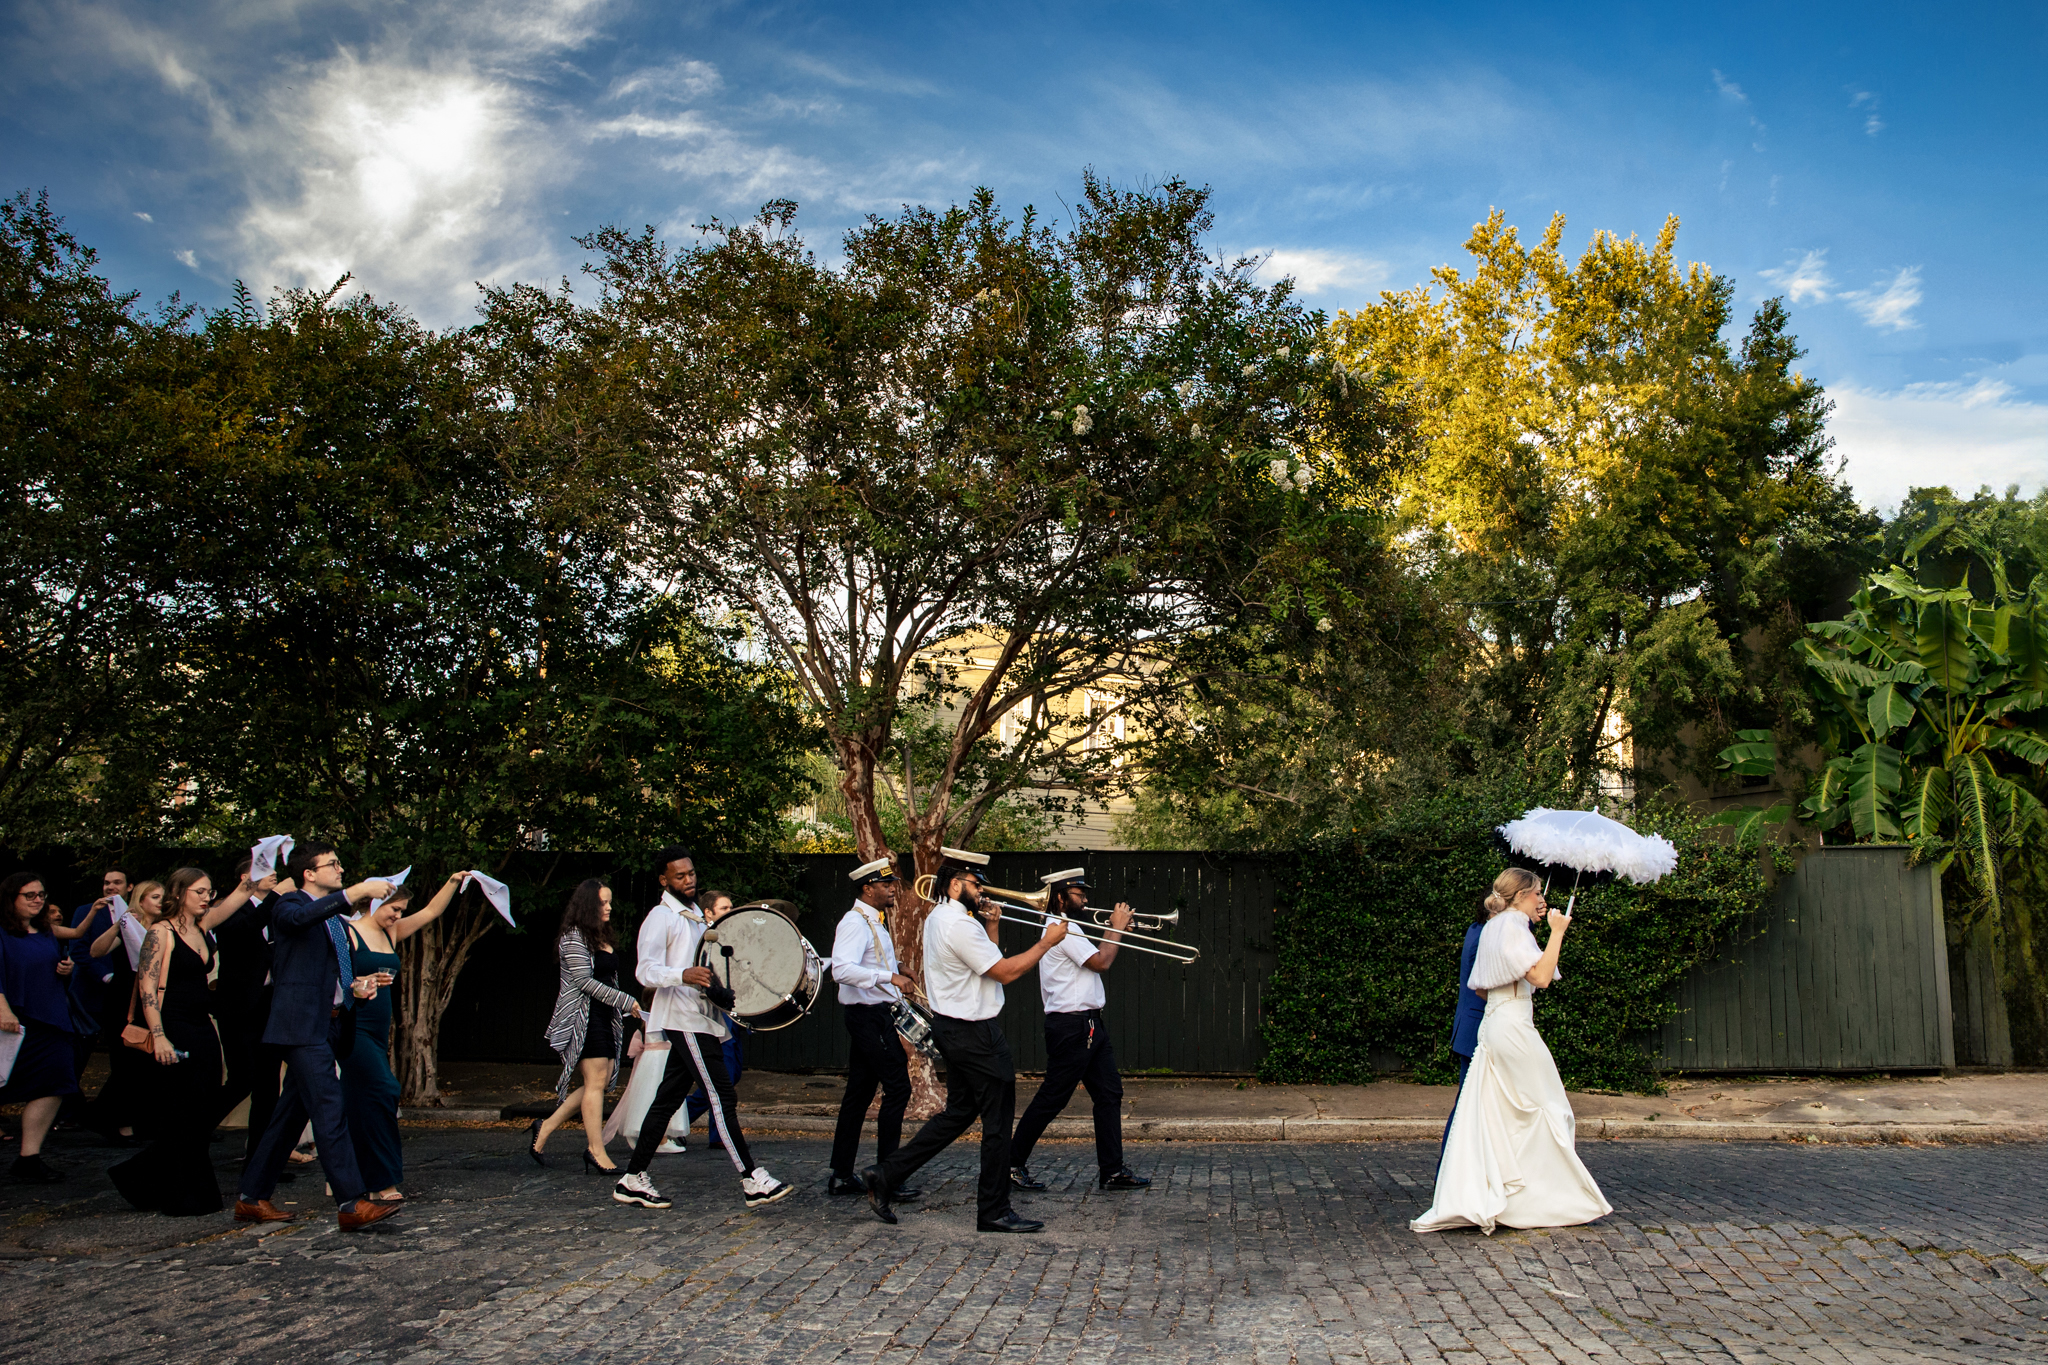 A group of brides and grooms walking down a street with umbrellas in New Orleans.